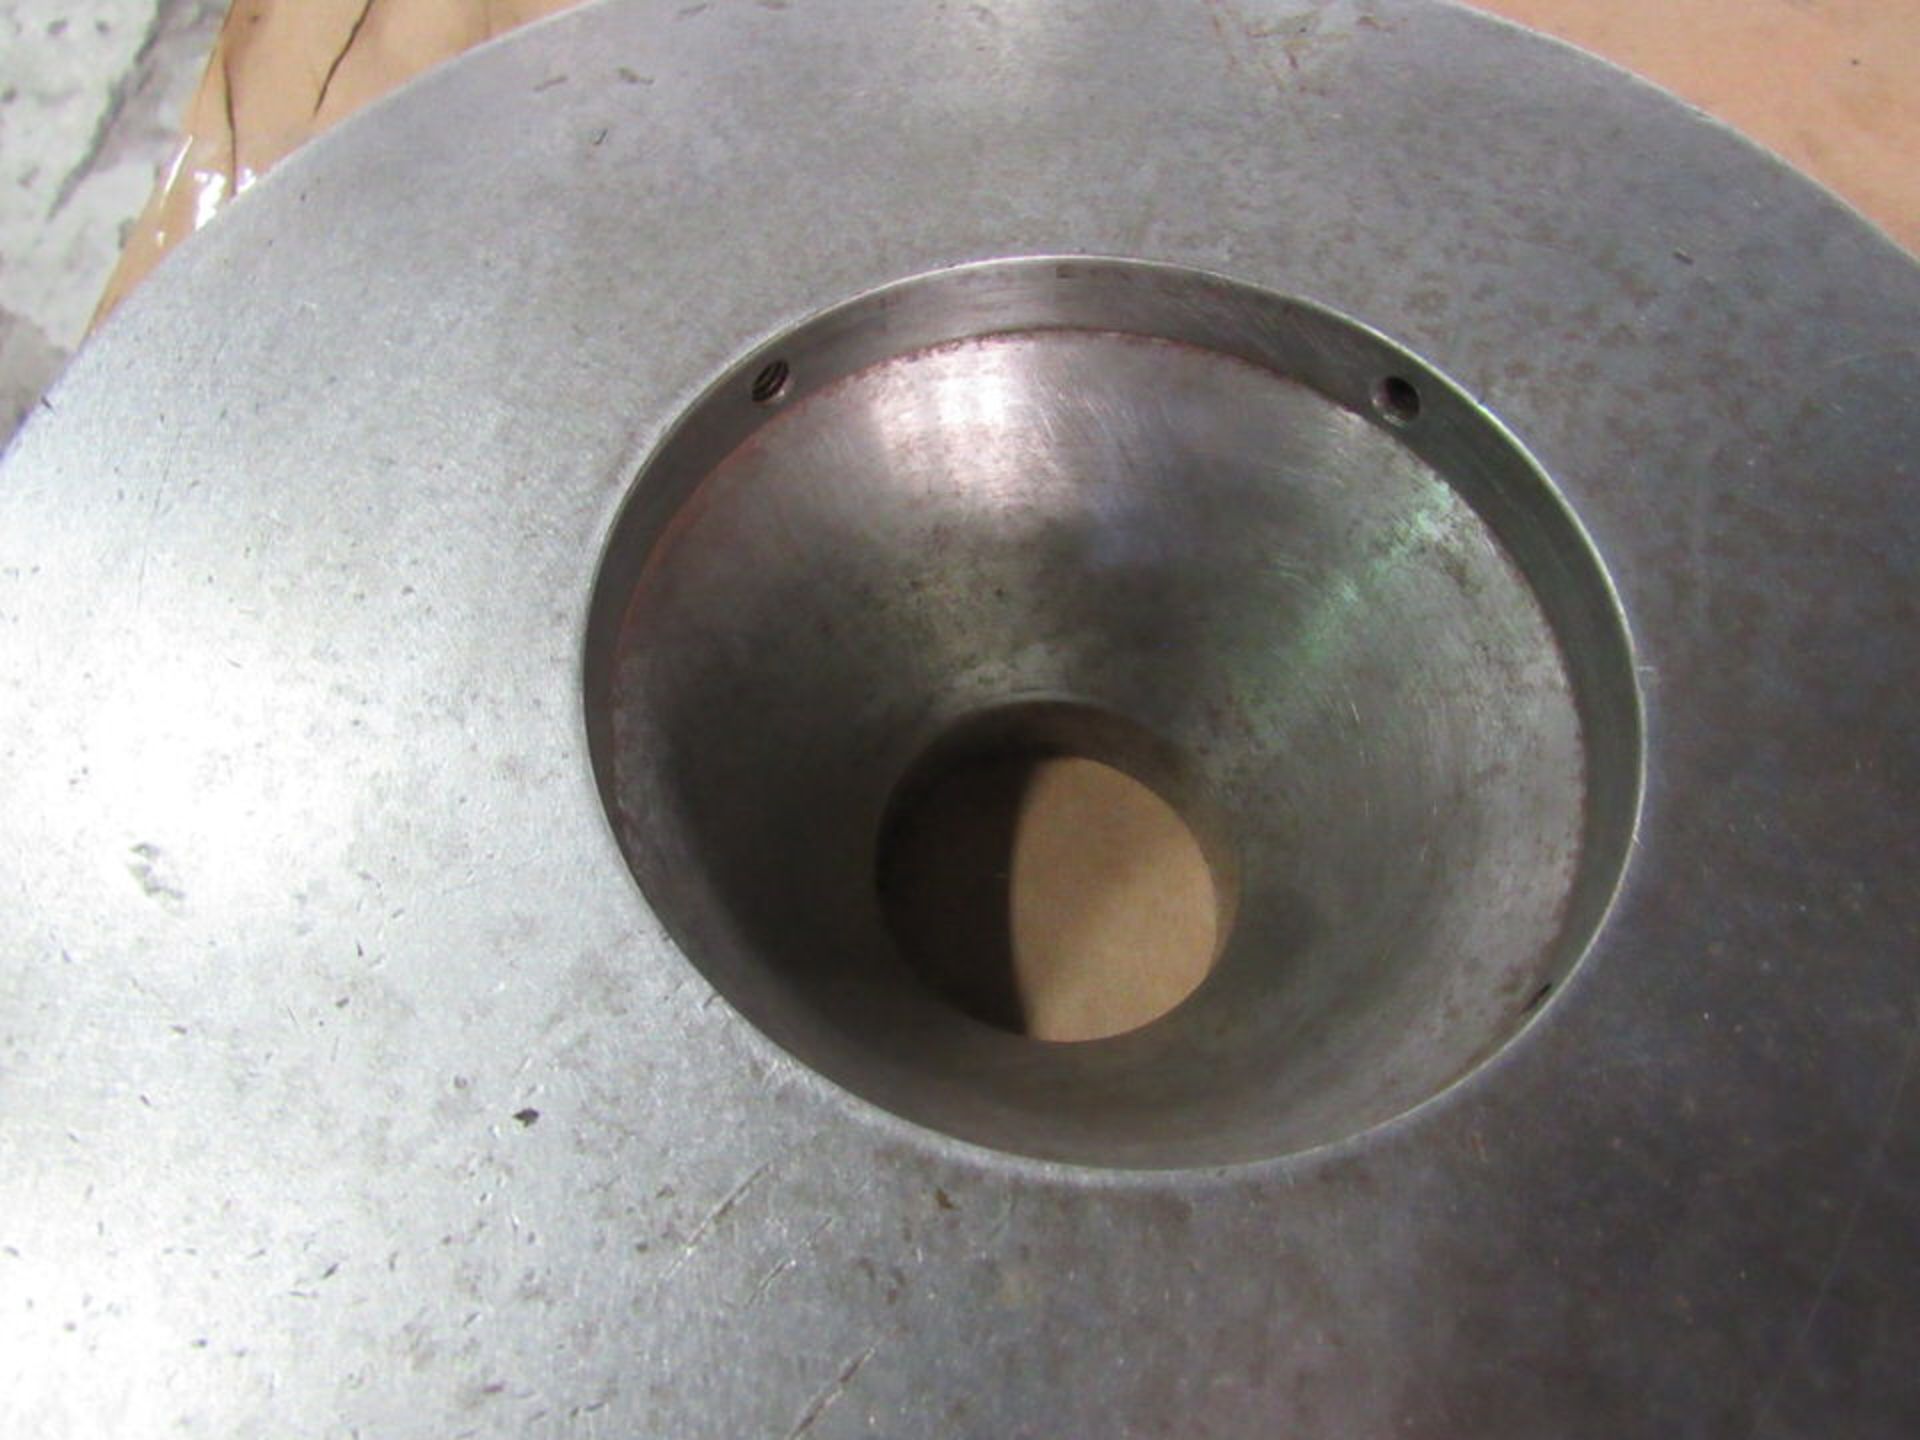 Tapered Adapter Fixture, 10-1/4" base with 4-1/2" hole, 7-1/2" top with 2-1/8" hole, 3-1/2" - Image 4 of 4